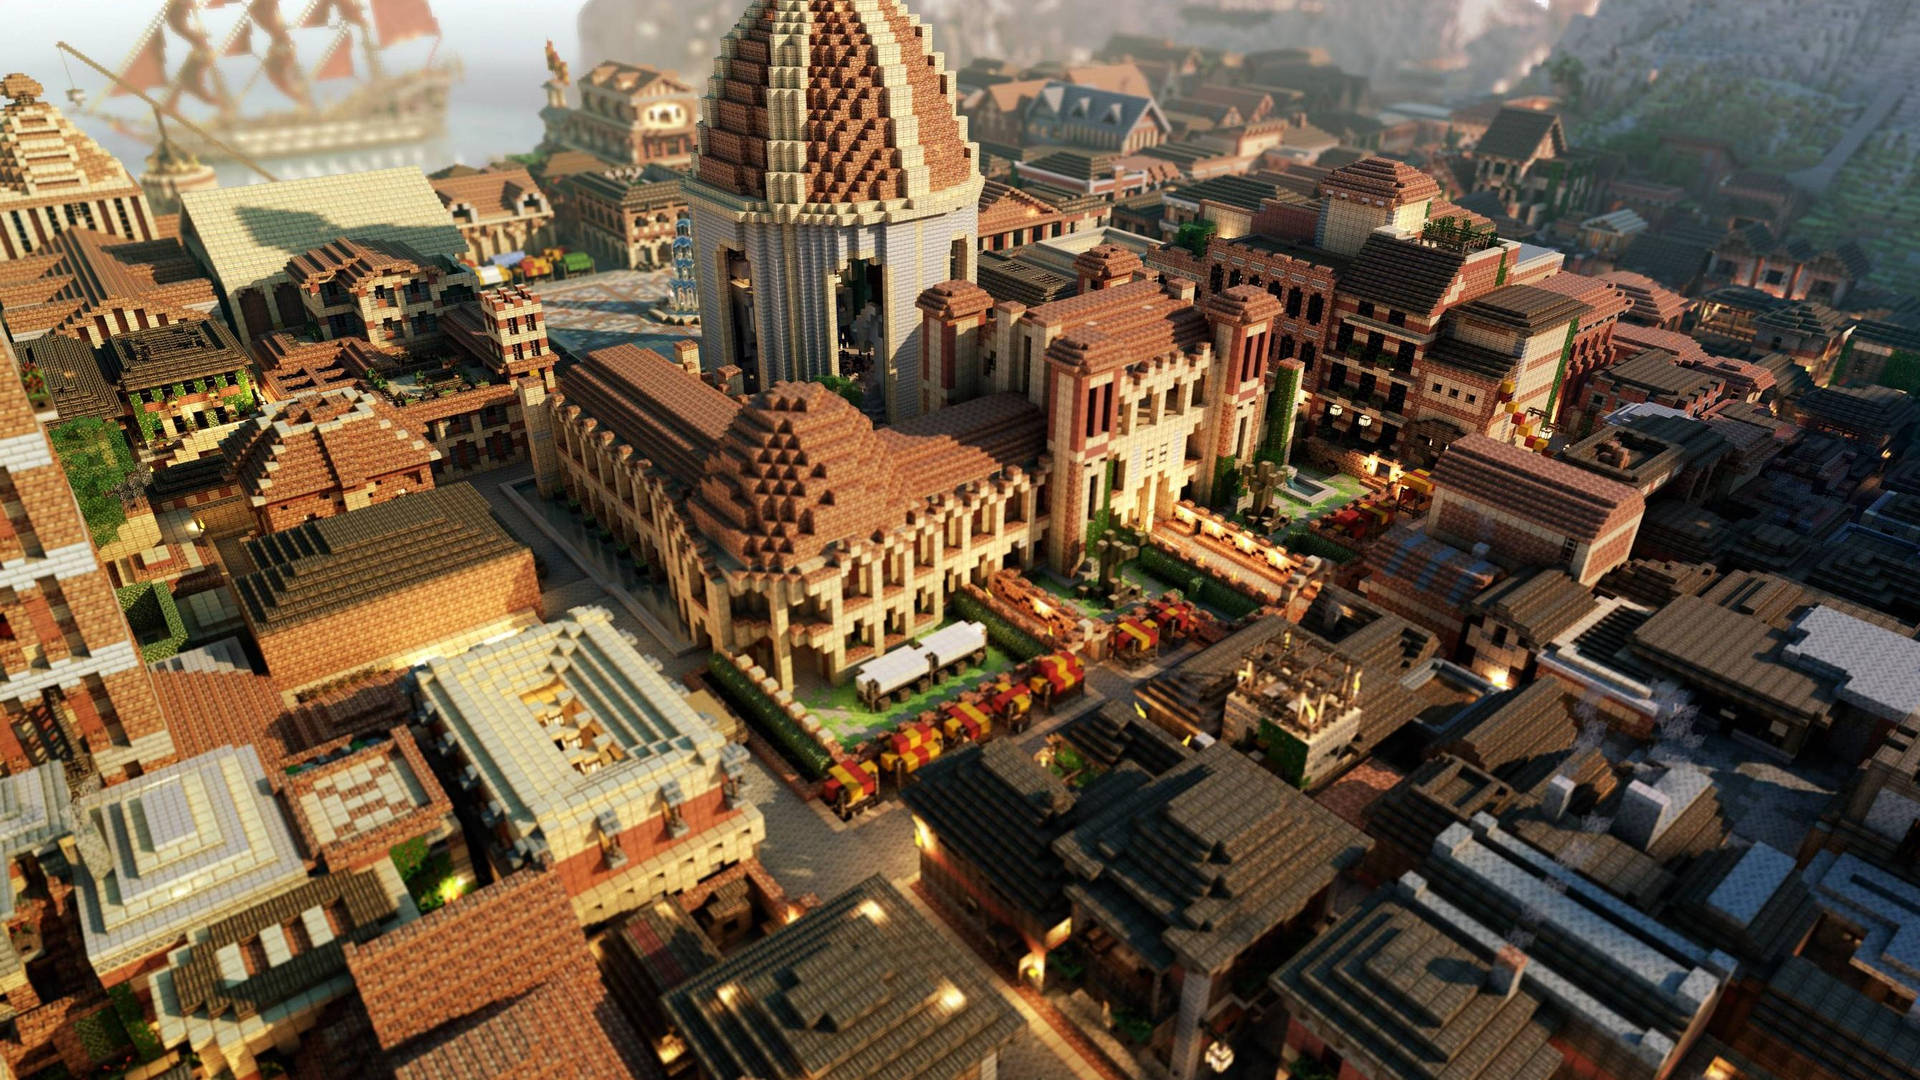 Explore the mystical medieval city of Minecraft Wallpaper